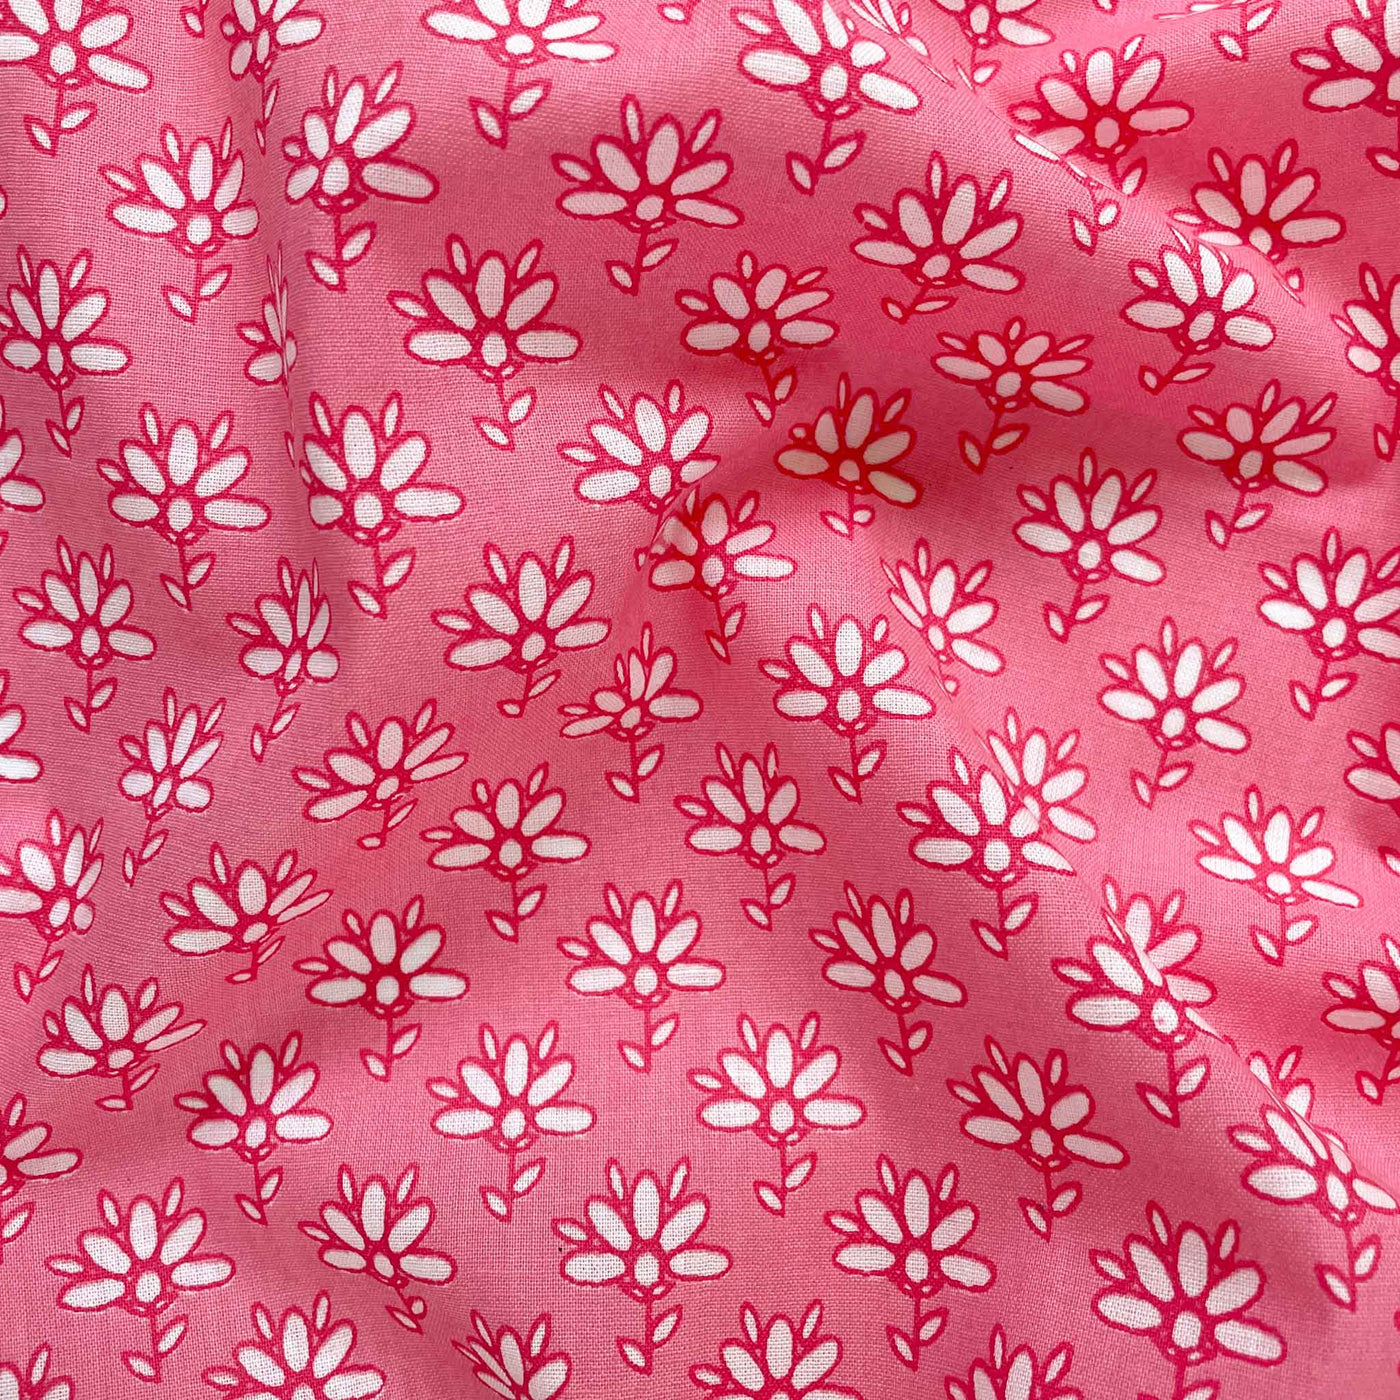 Fabric Pandit Fabric Light Pink and White Mini Flowers Hand Block Printed Pure Cotton Fabric (Width 43 inches)